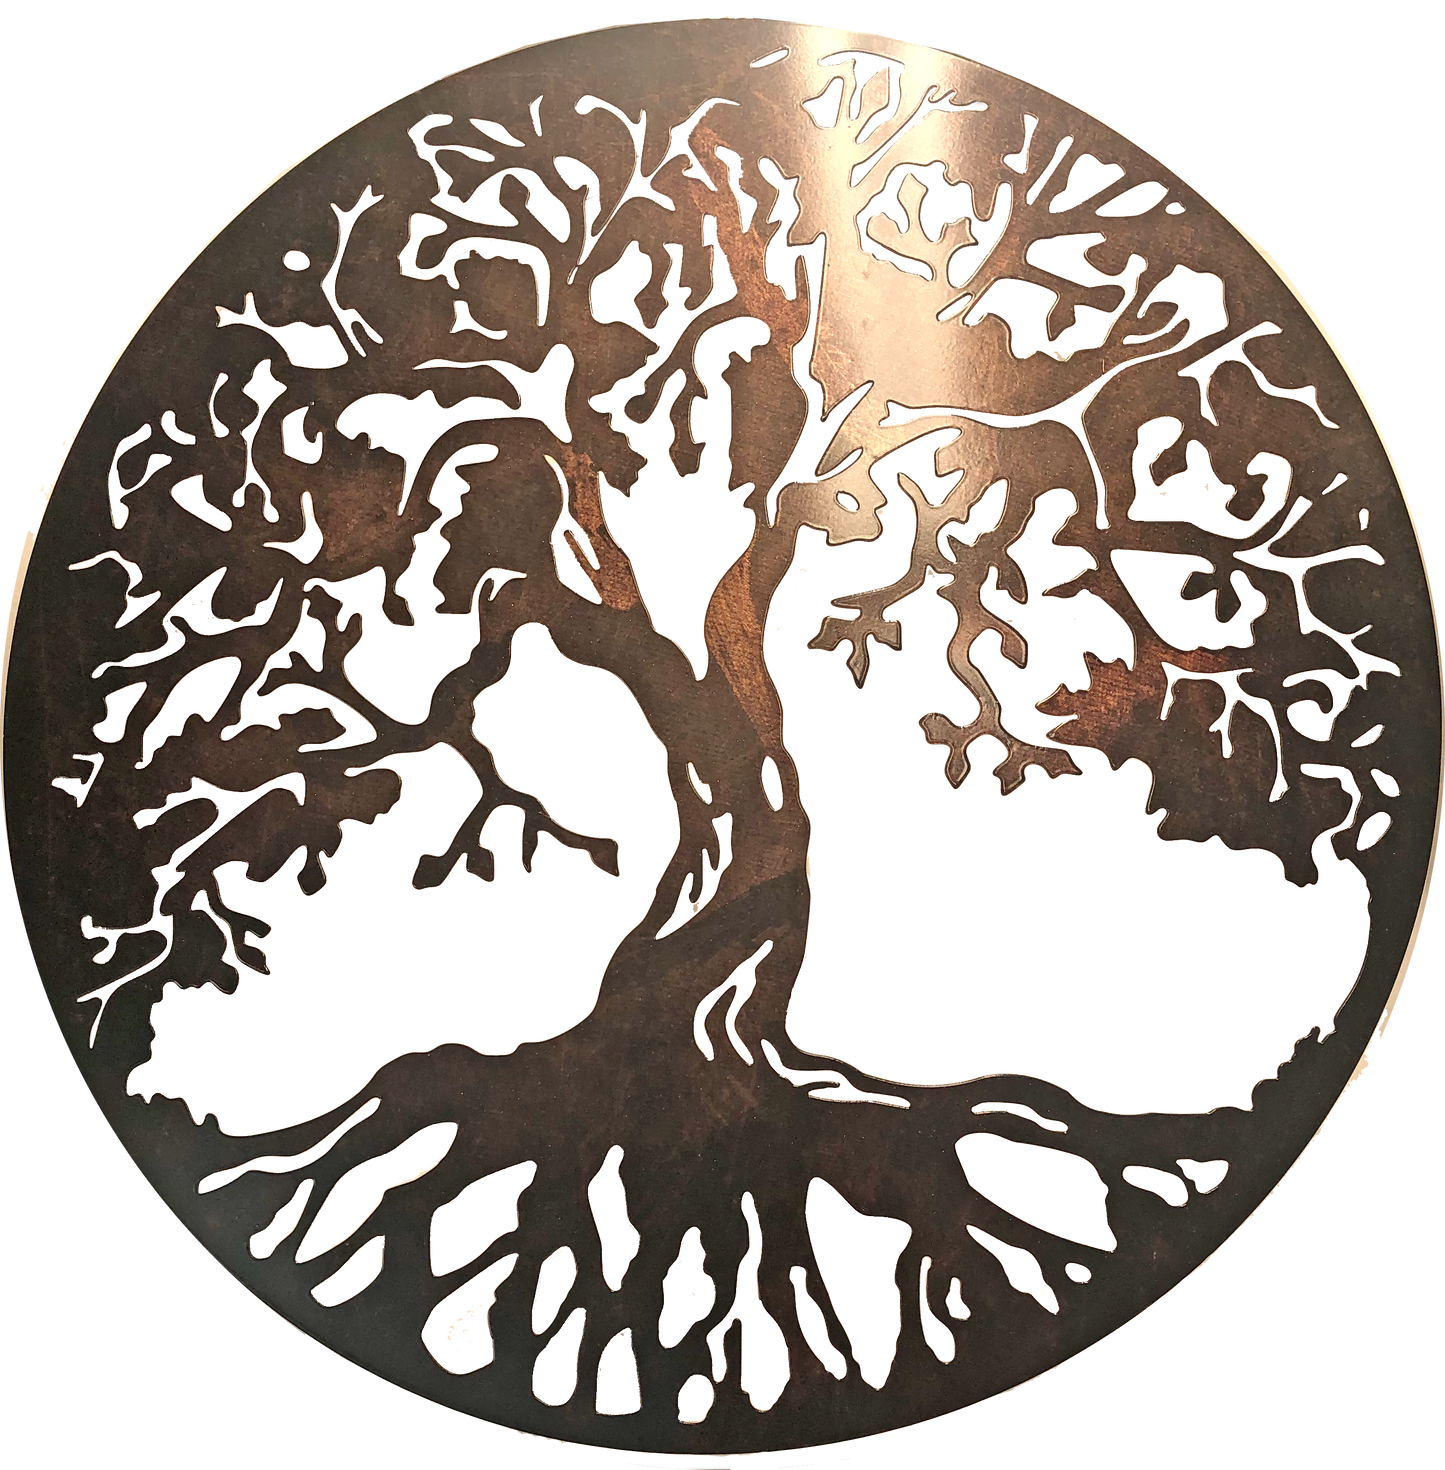 Tree of life metal wall art by d'ears, 22 inch, made in the USA, 18 gauge steel